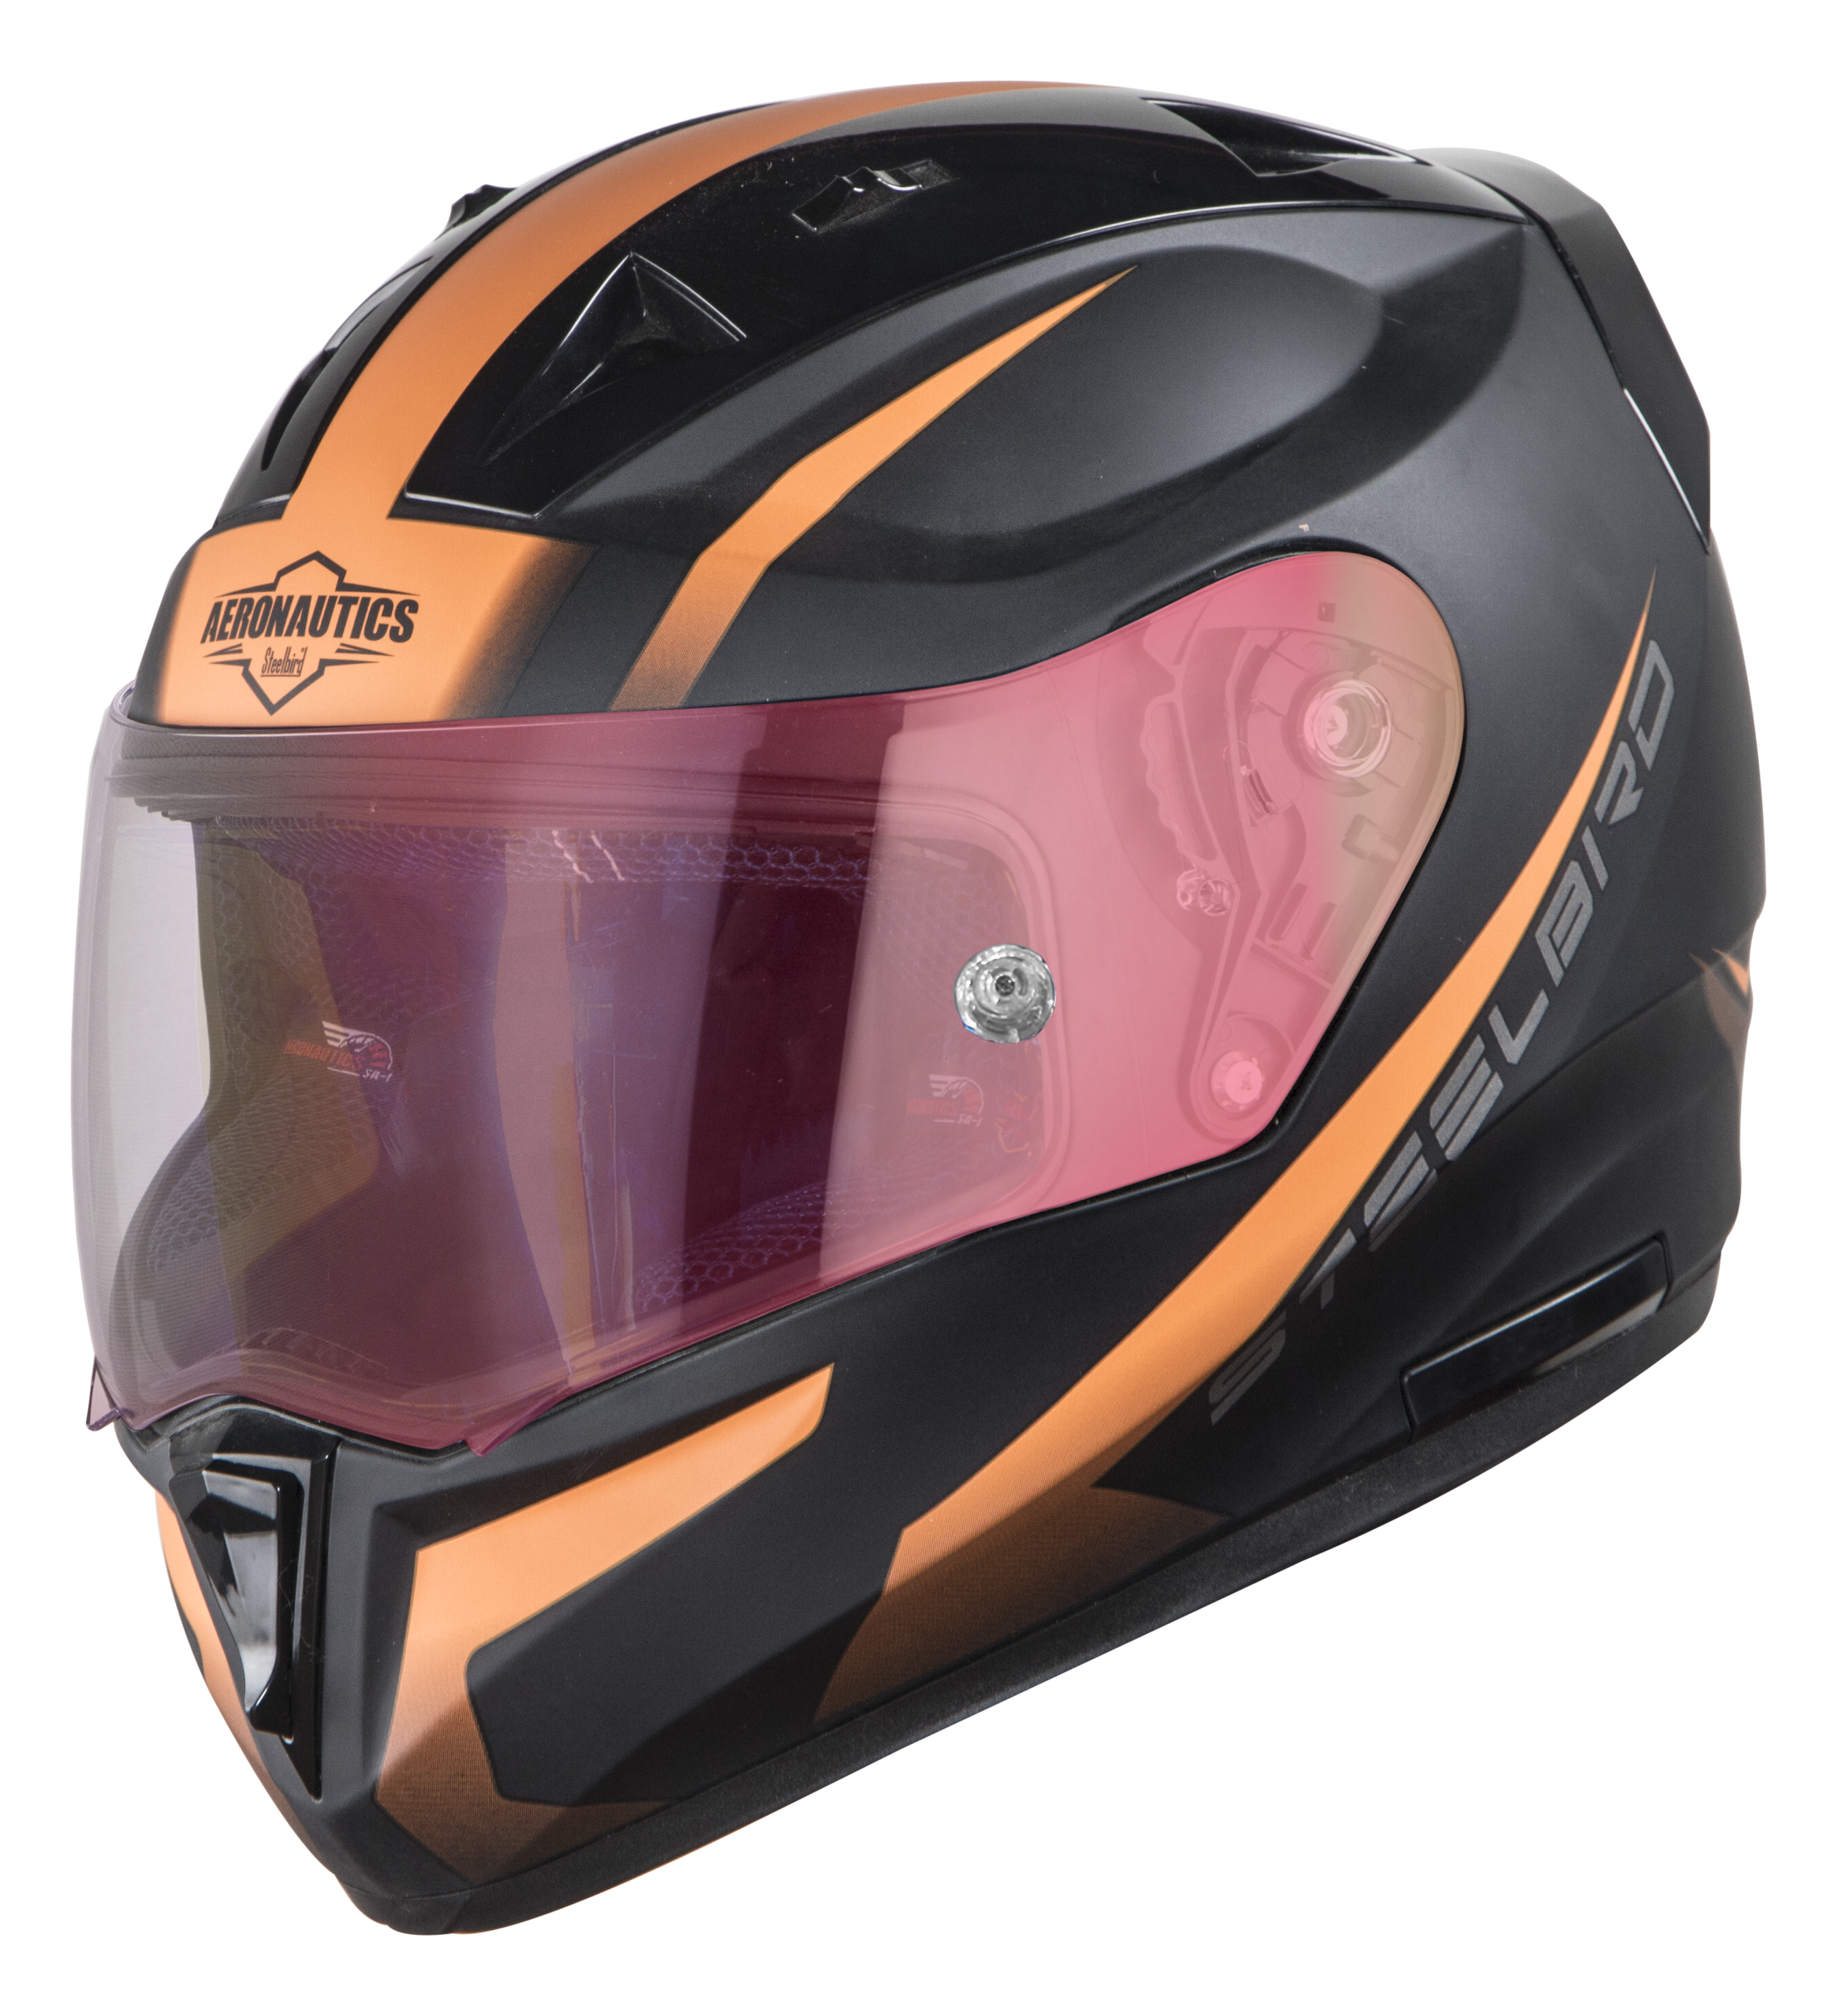 SA-1 WHIF Mat Black/Orange (Fitted With Clear Visor Extra Anti-Fog Shield Night Vision Gold Visor Free)